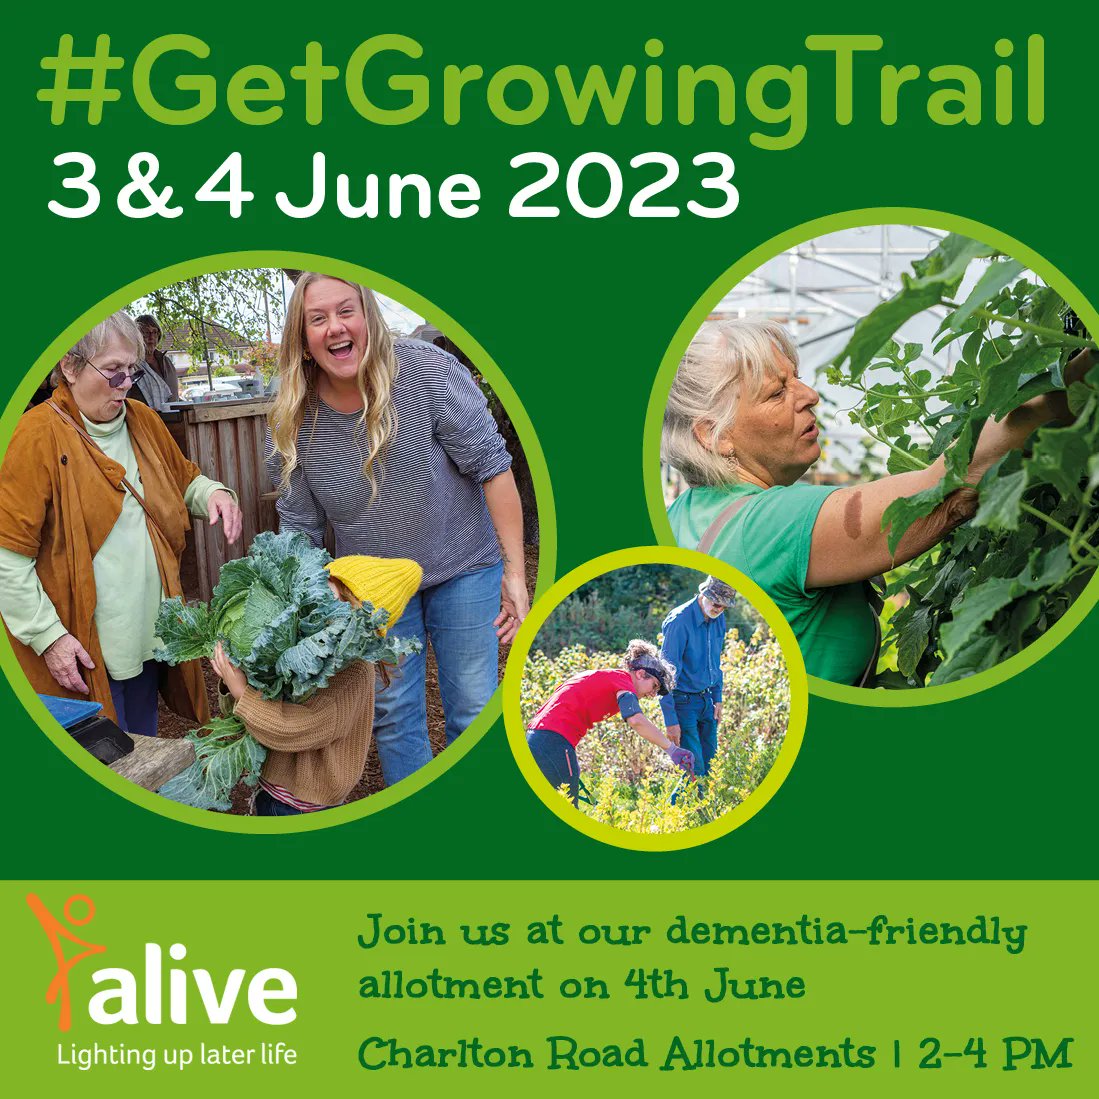 This #worldtherapeutichorticultureday, we're thrilled to announce that we'll once be opening our doors to the public as part of this year's #GetGrowingTrail. Come and learn more about STH in the peaceful, nature-rich sanctuary that is our allotment 🌱 cc/ @Bristolfoodnet